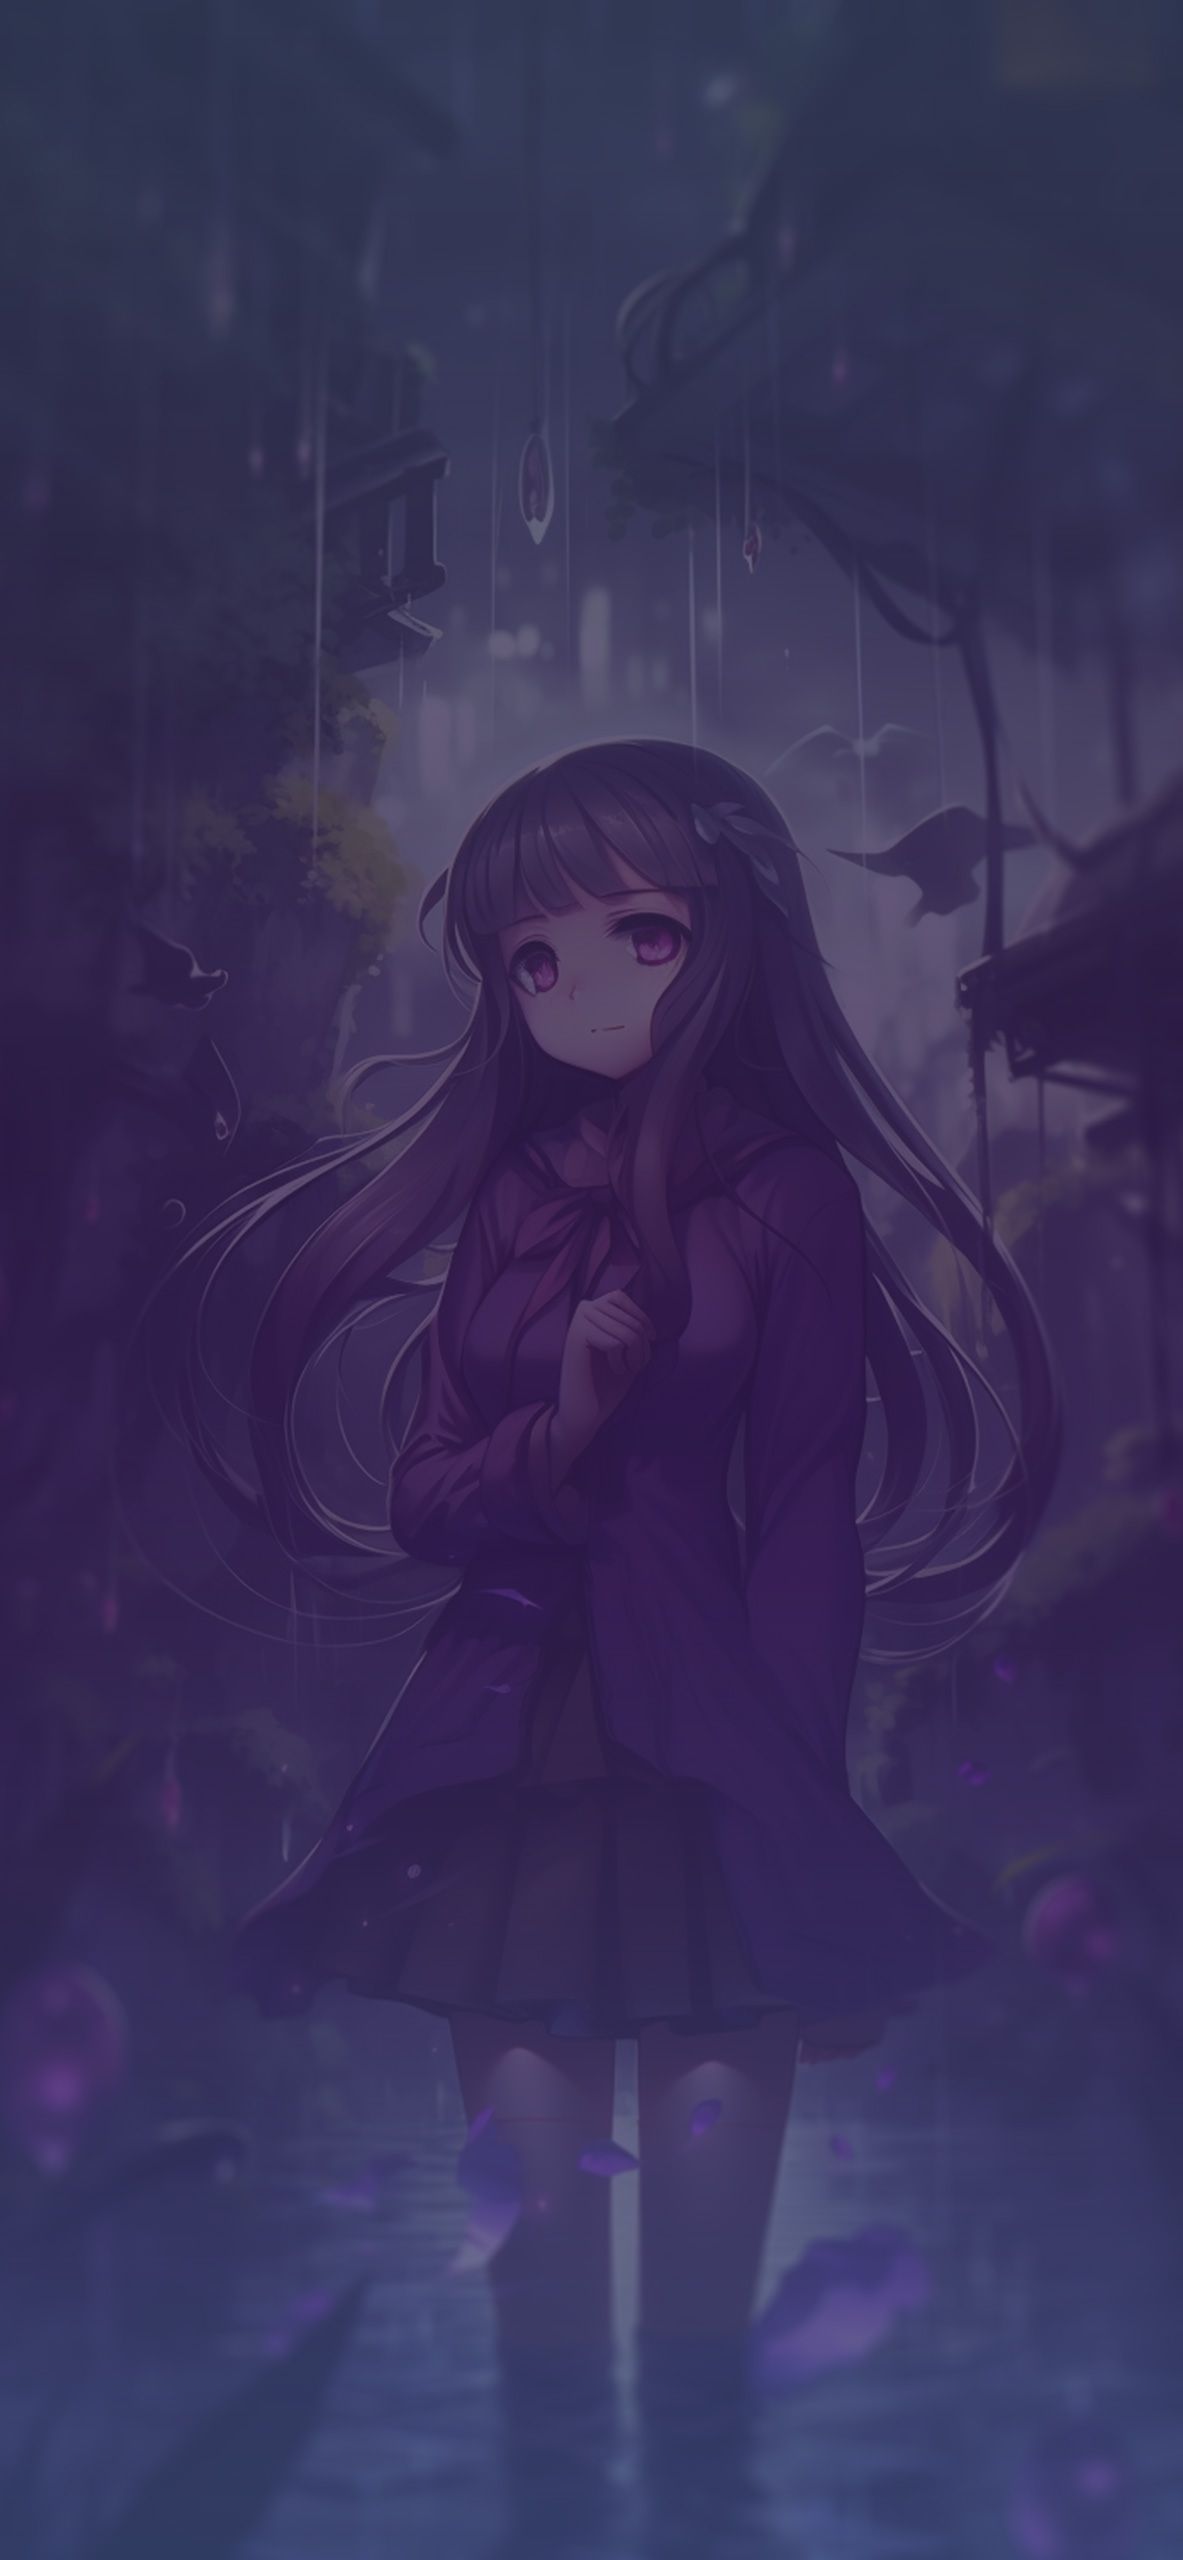 Anime girl in the rain wallpaper 1242x2688 for your iPhone 11, iPhone 11 Pro, iPhone 11 Pro Max, XS, XS Max, XR, X, 8, 8 Plus, 7, 7 Plus, 6, 6 Plus, SE, and other mobile devices - Rain